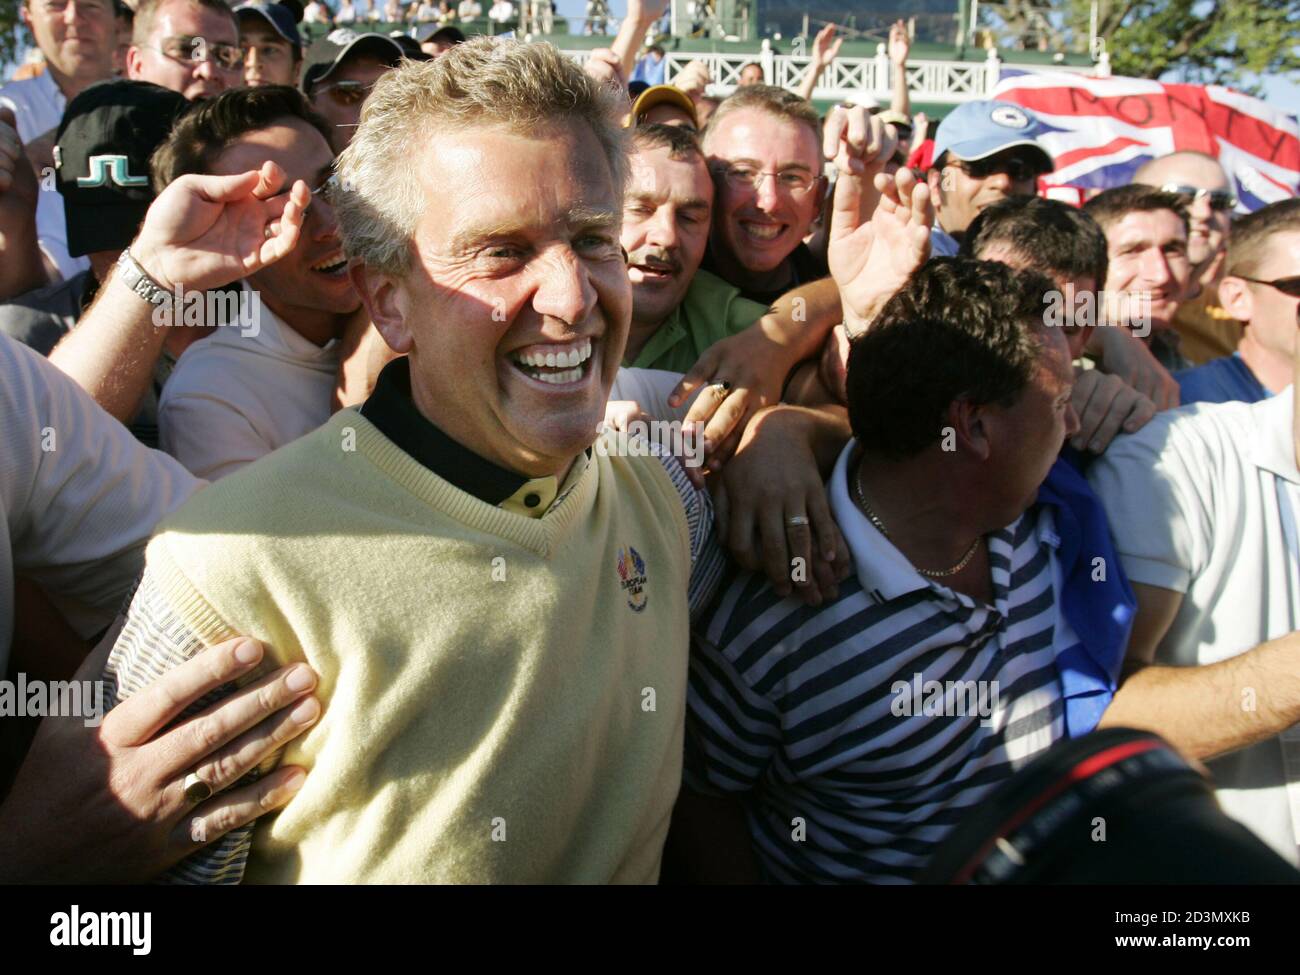 European Ryder Cup golfer Colin Montgomerie from Scotland celebrates with fans after clinching the Ryder Cup victory for Europe, with a victory over U.S. golfer David Toms at the 35th Ryder Cup Matches in Bloomfield, Michigan September 19, 2004. Europe defeated the U.S. 18 1/2 to 9 1/2 to win the cup. REUTERS/Mike Blake pictures of the month September 2004  GMH/SV Stock Photo